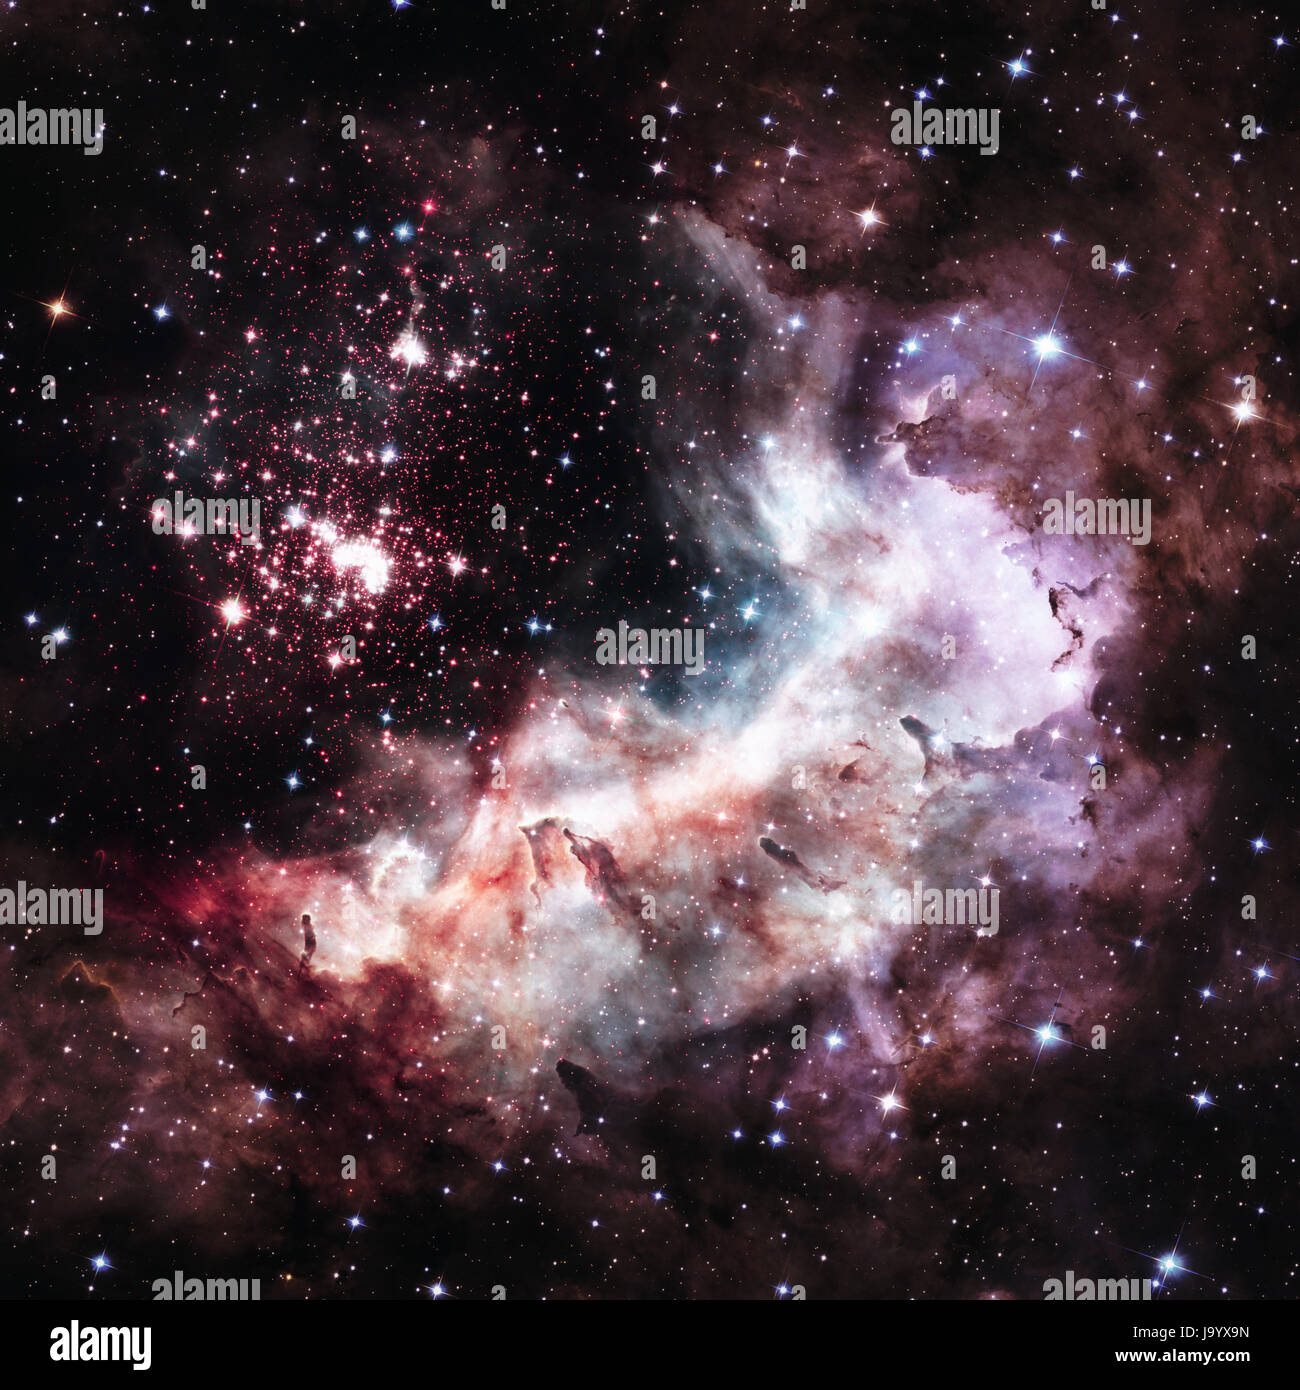 Westerlund 2 is an obscured compact young star cluster in the Milky Way. Super star cluster in the constellation Carina. Retouched image with small DO Stock Photo